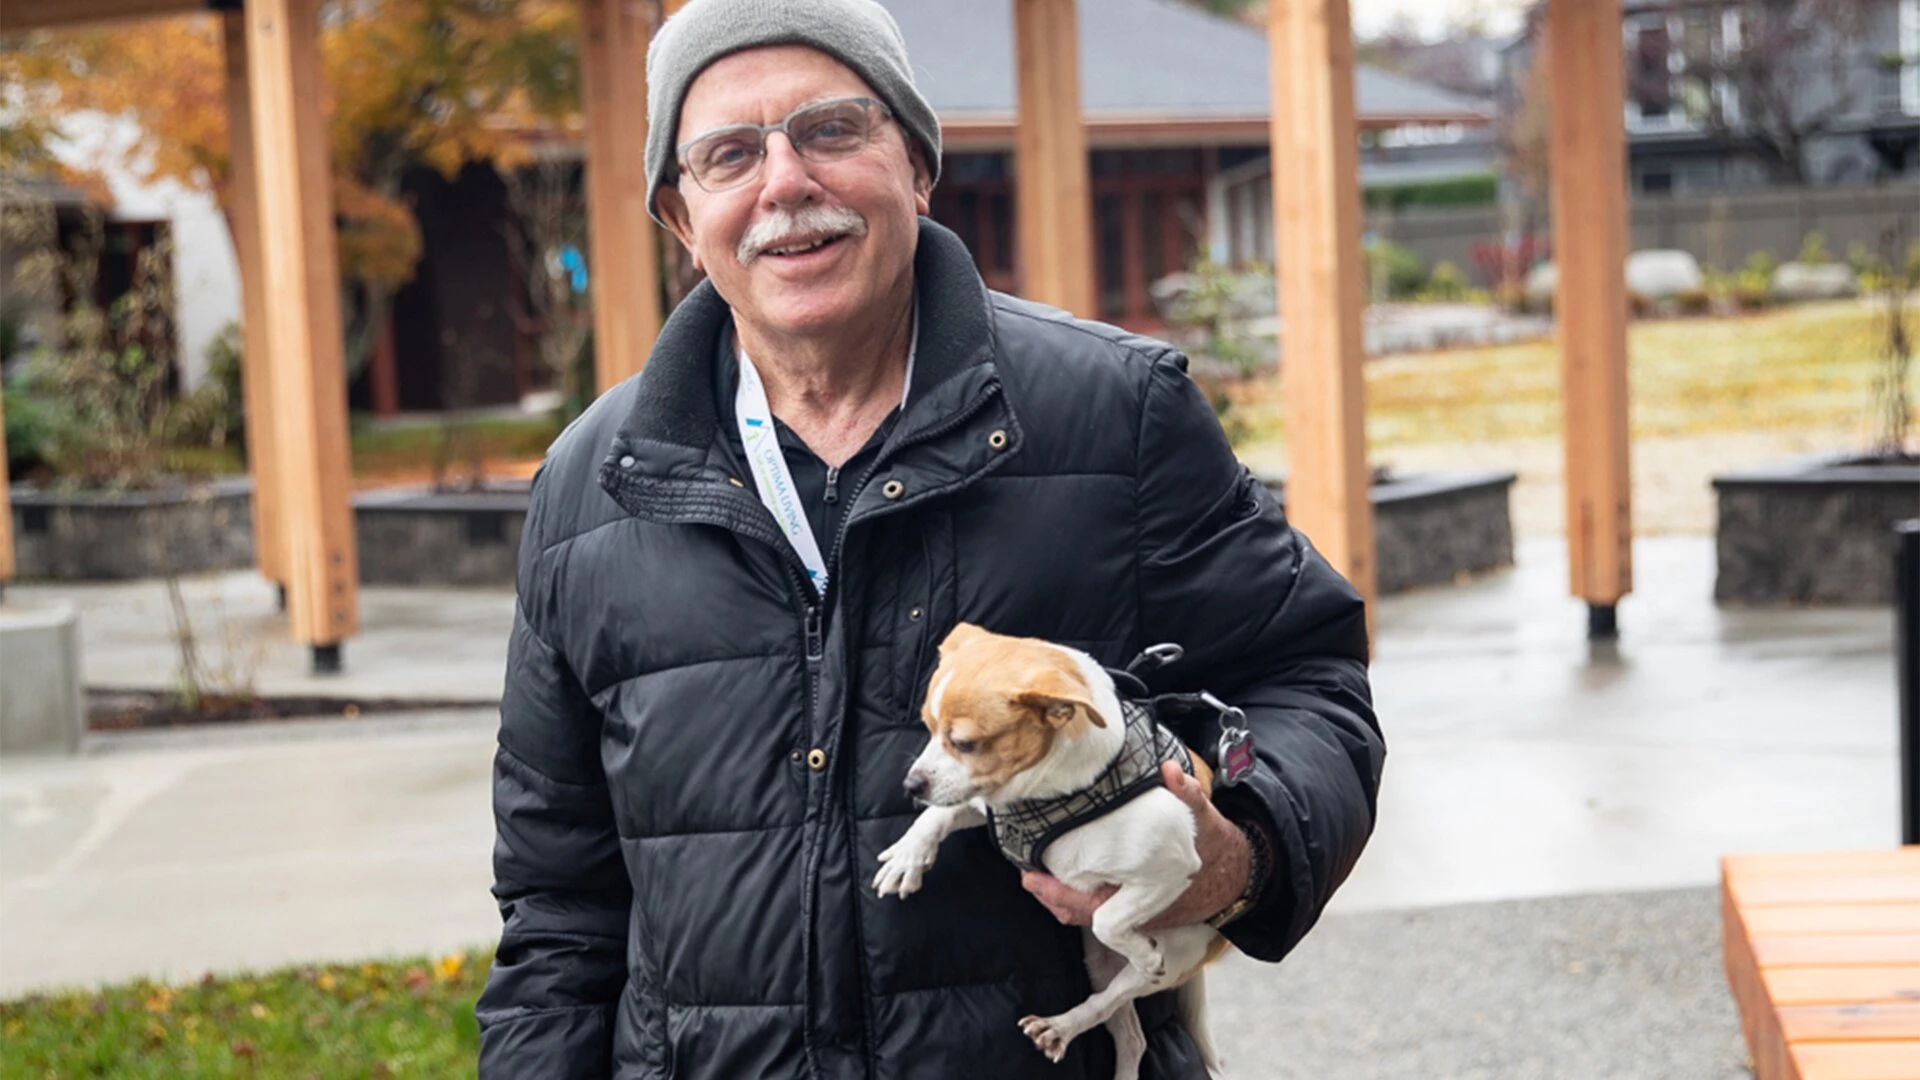 A senior man holding a dog in his arms outside senior housing